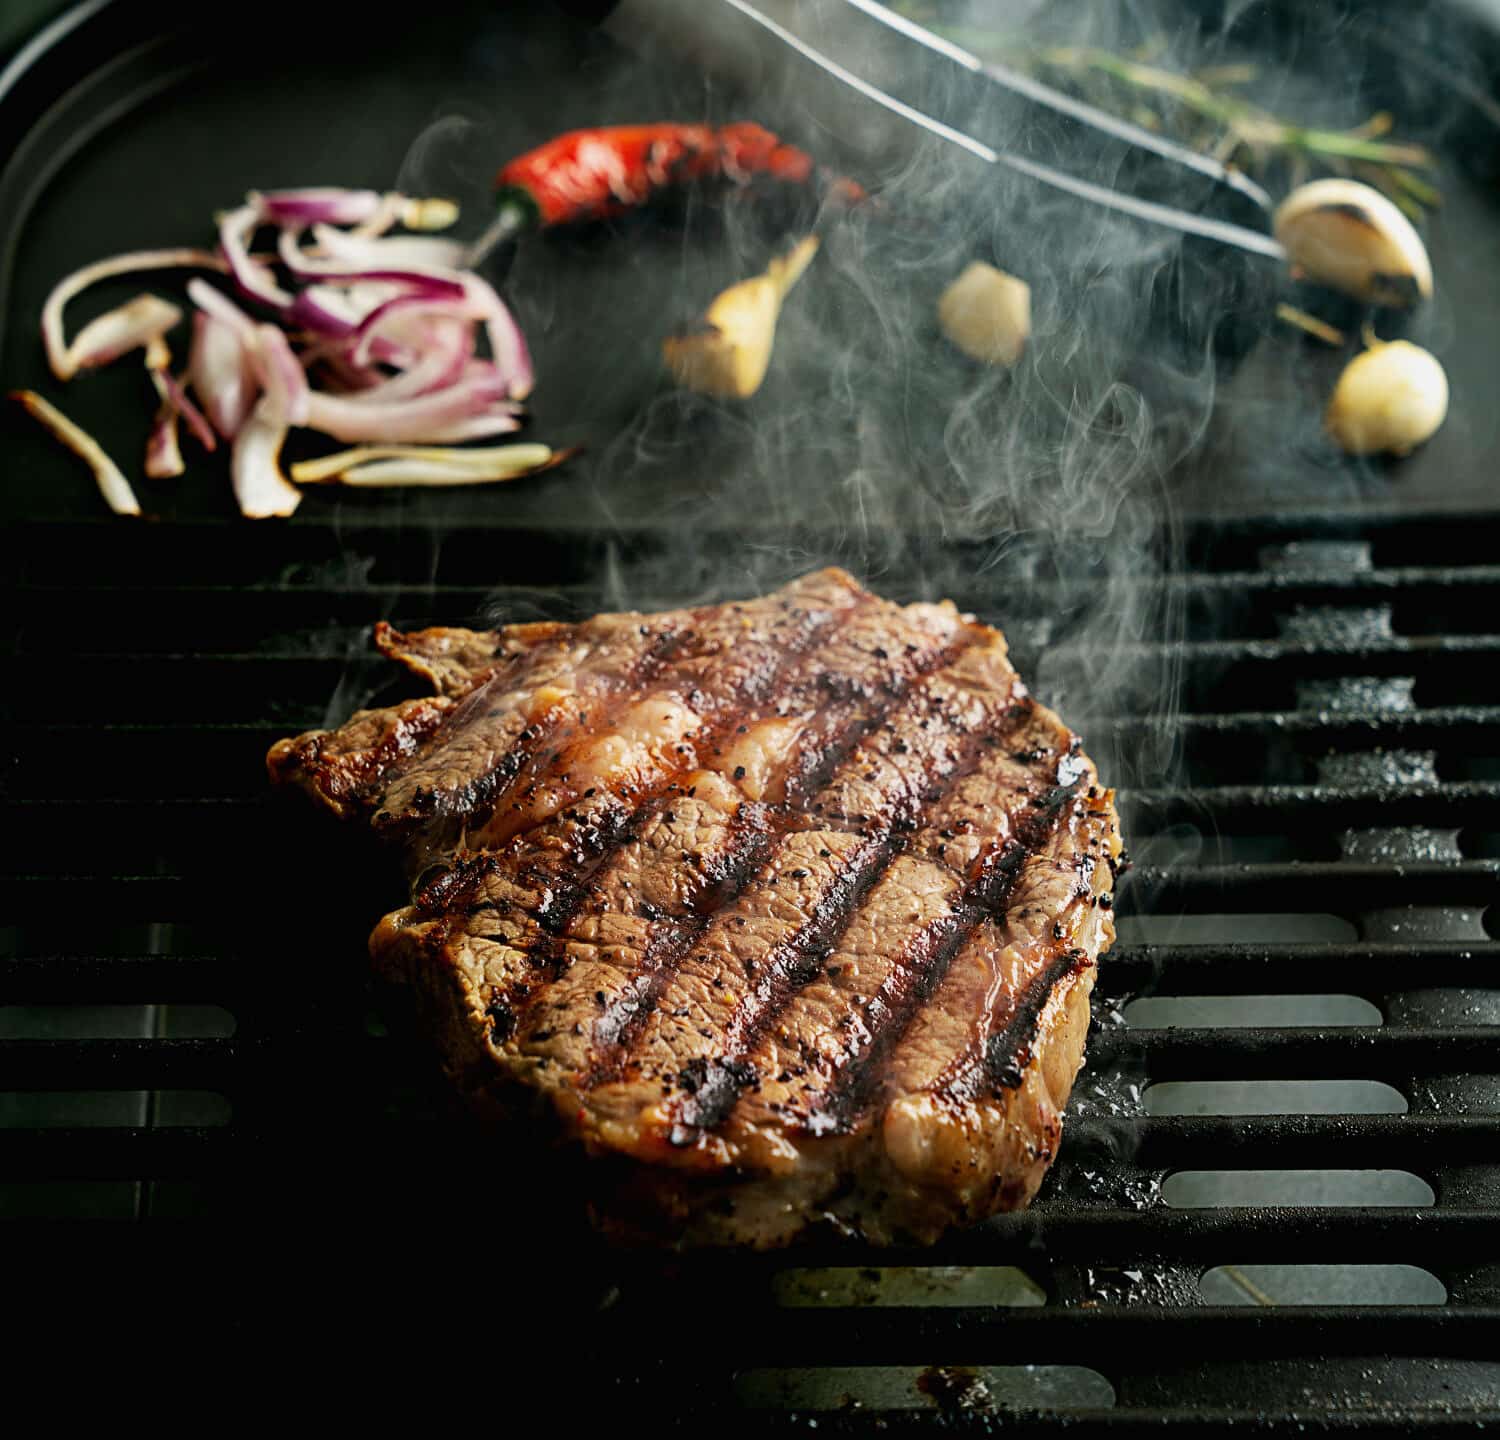 Grilling rib eye steak at home. Natural smoke. Summer grill, cooking at home concept